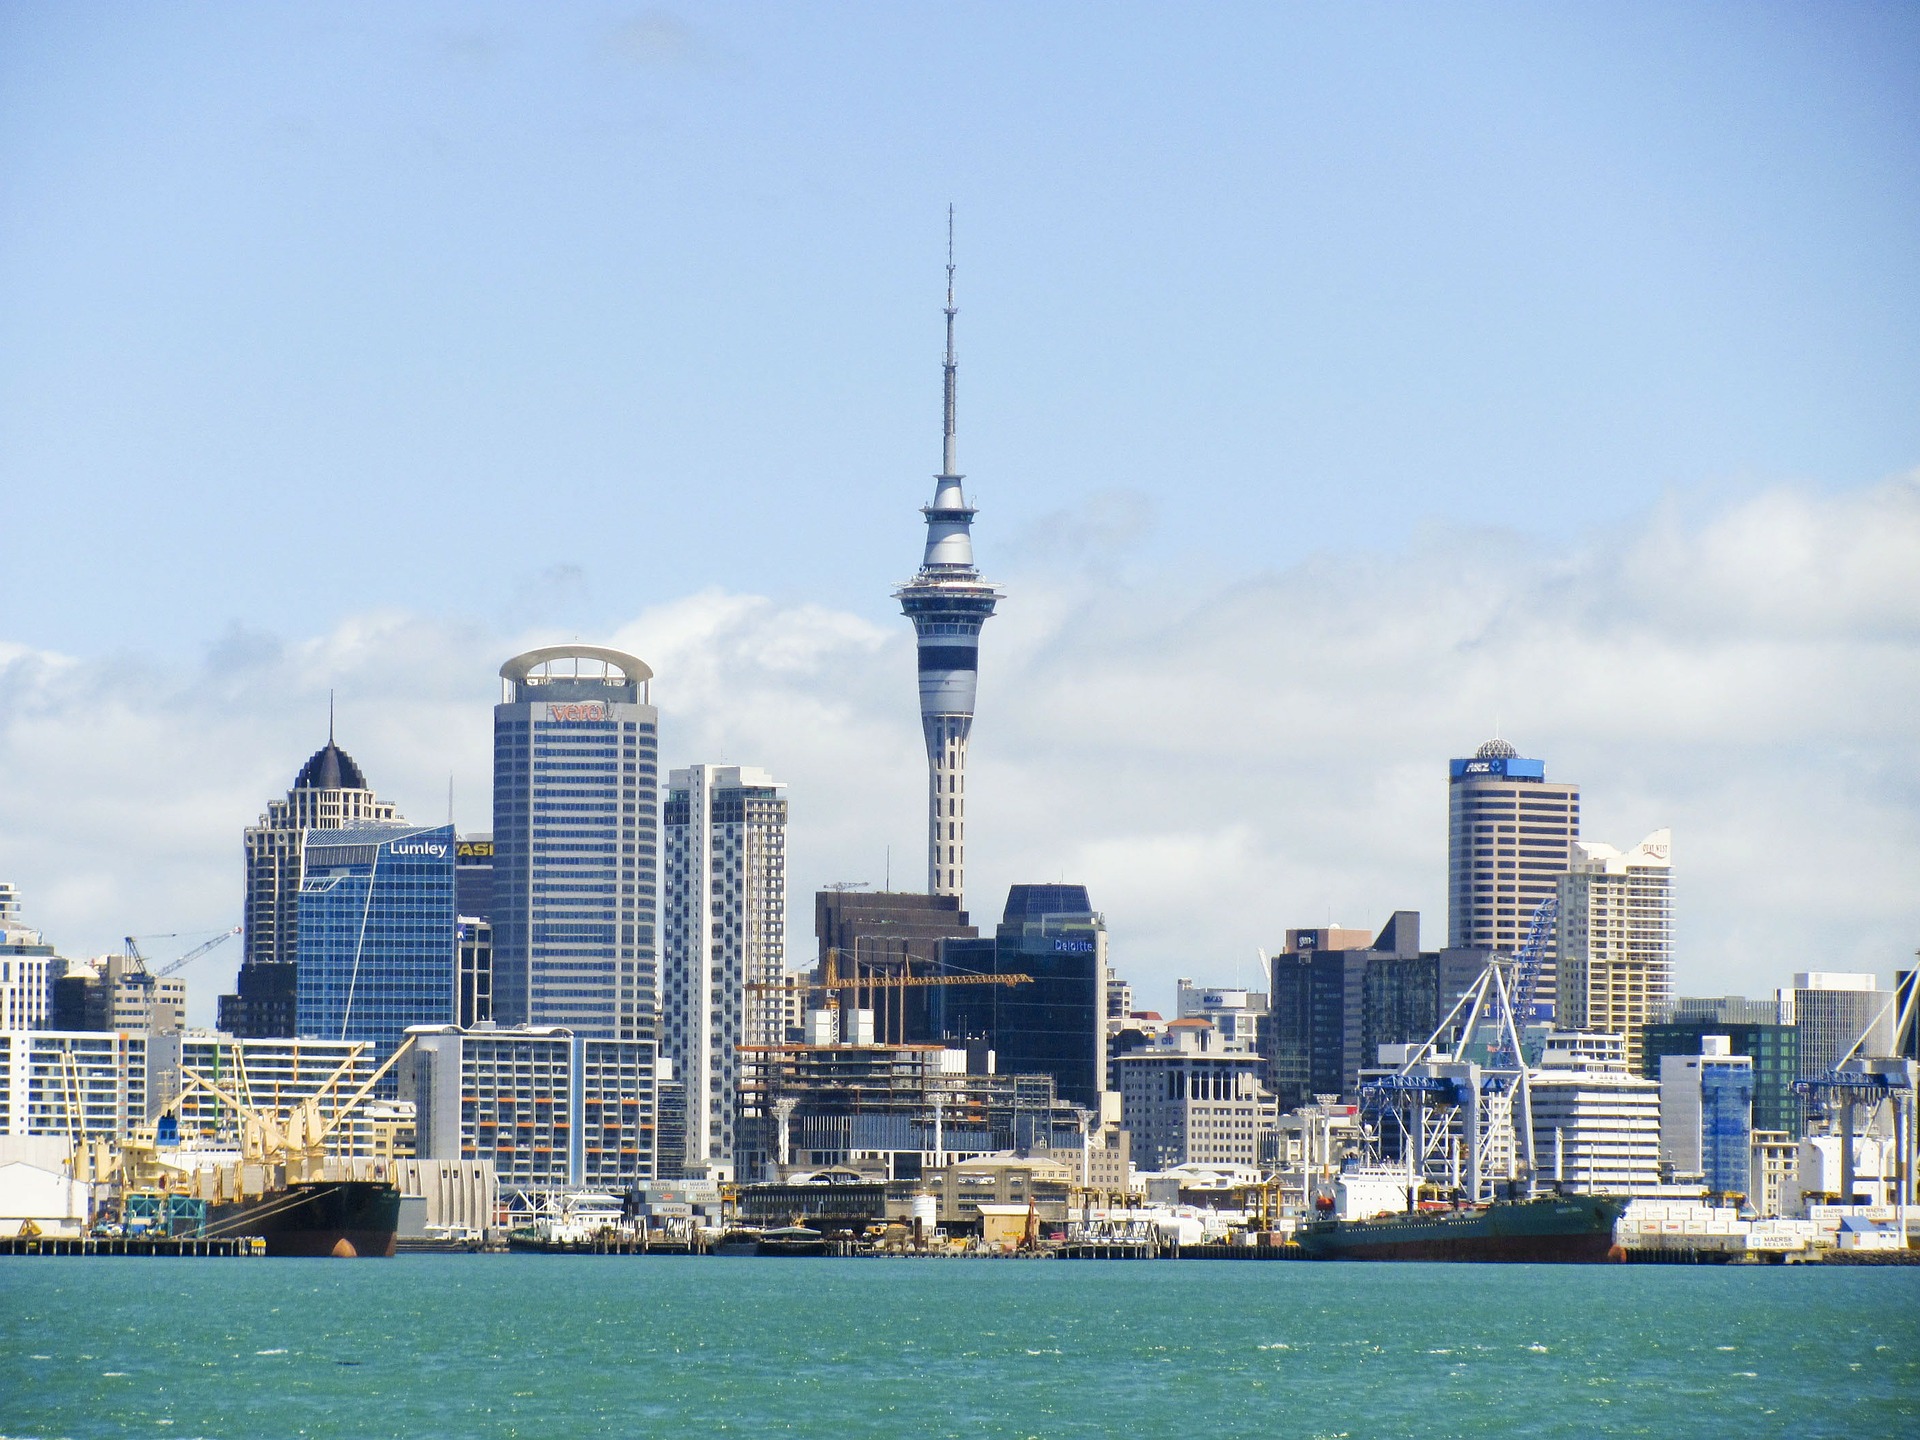 NEW ZEALAND ERGONOMICS & ENVIRONMENTAL HEALTH AND SAFETY REQUIREMENTS